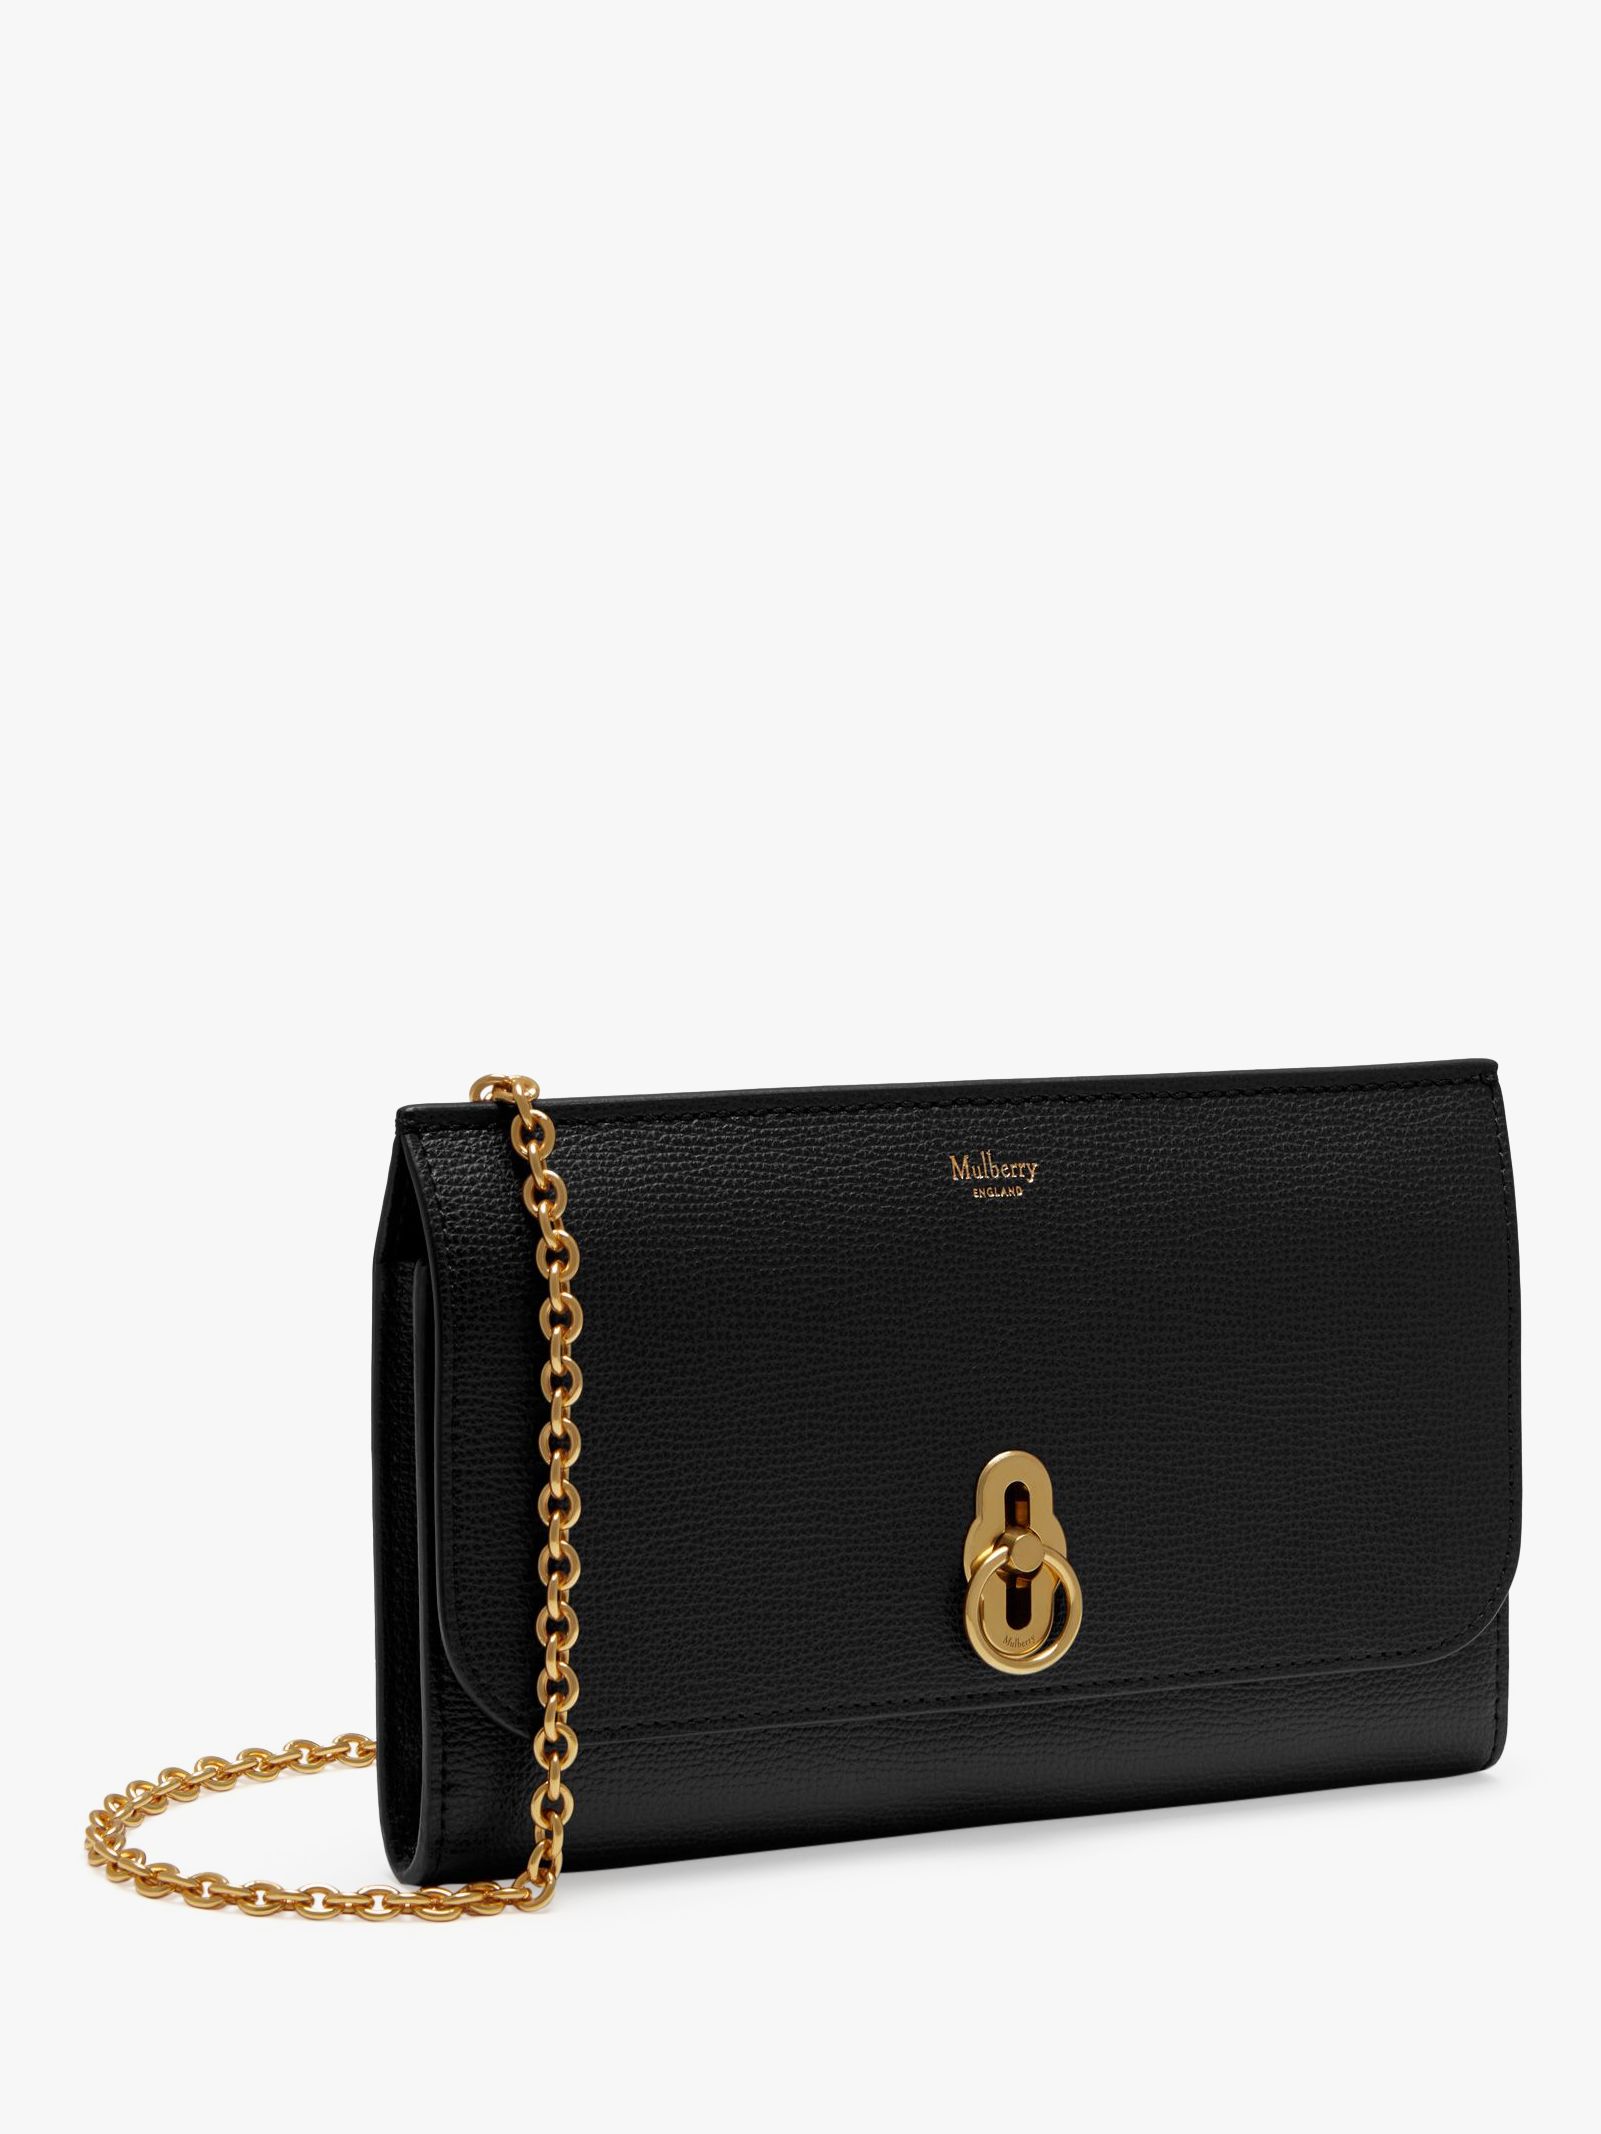 Mulberry Amberley Cross Grain Leather Clutch Bag at John Lewis & Partners